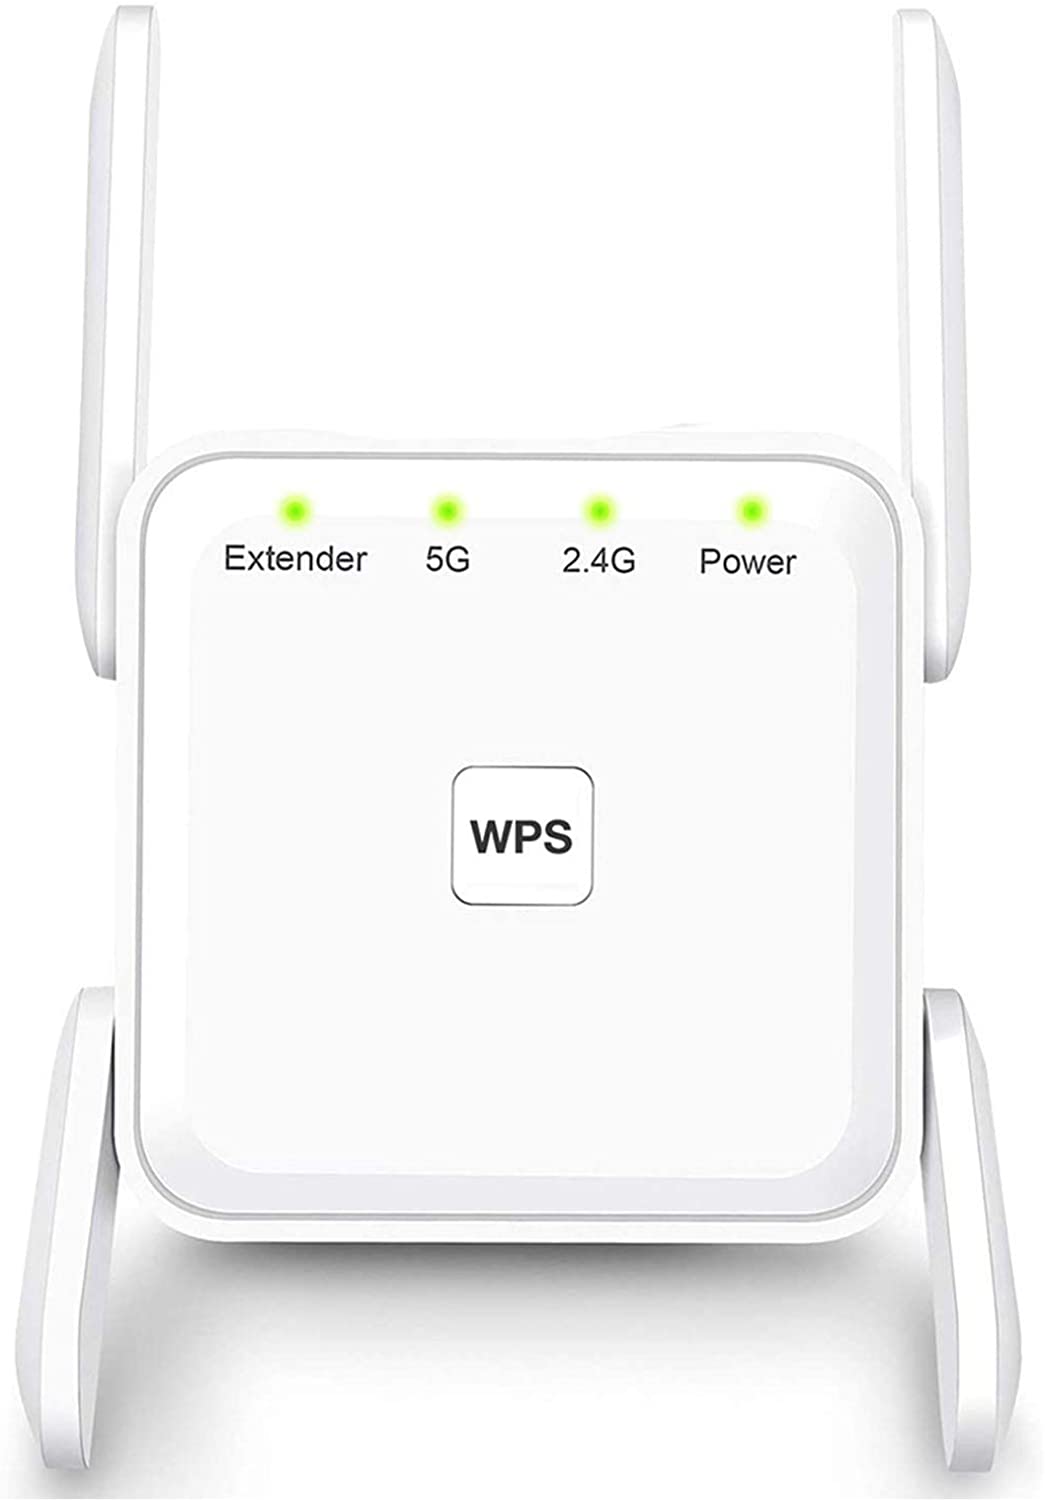 300Mpbs Wireless Booster with 2.4GHz High Gain Dual Antennas Compatible with Alexa Device for Covering Whole Home 2 Ethernet Ports WiFi Range Extender with WPS Internet Signal Repeater Black 